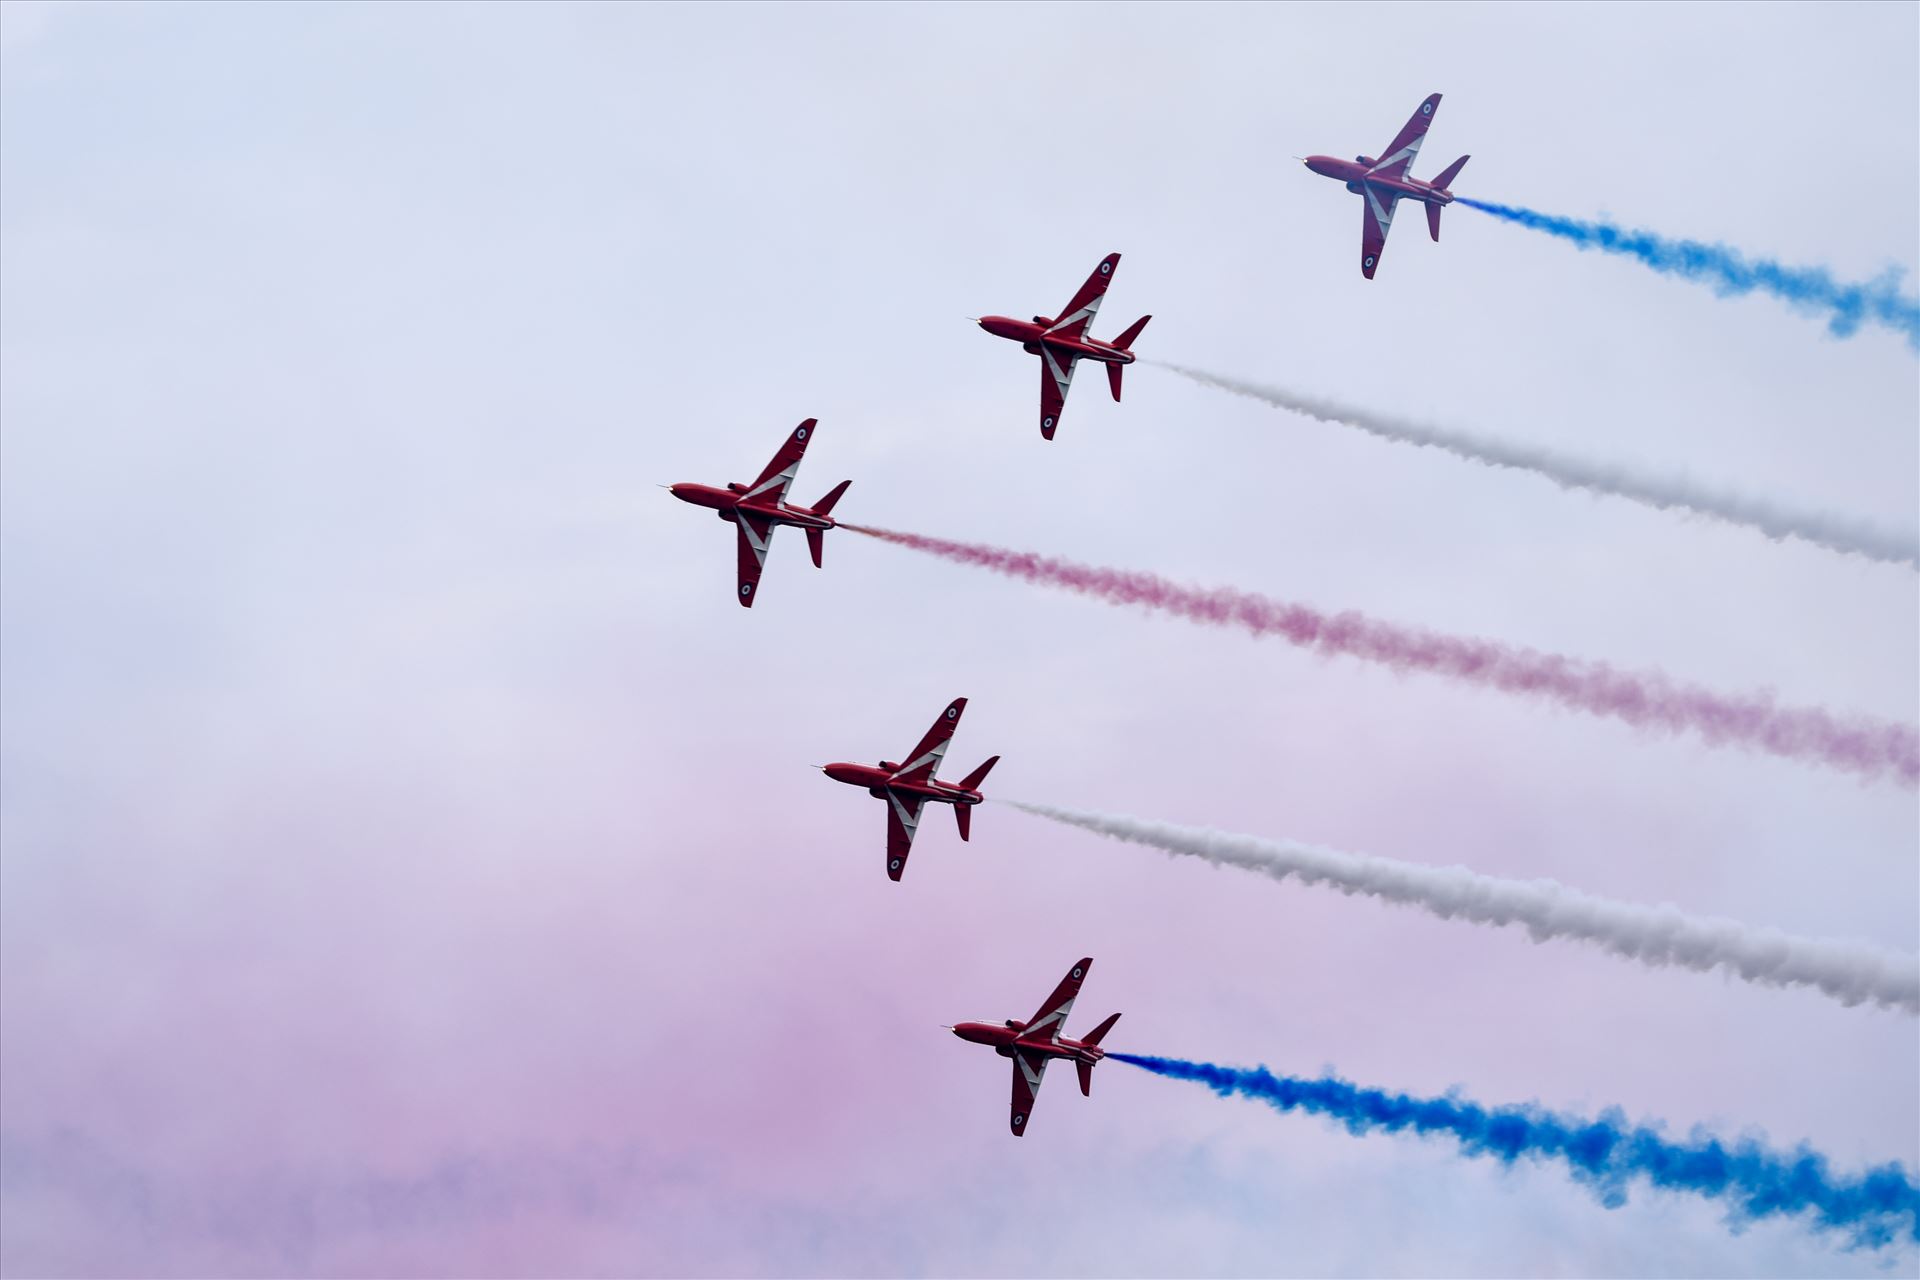 Red Arrows The Red Arrows taken at the Sunderland air show 2016 by philreay